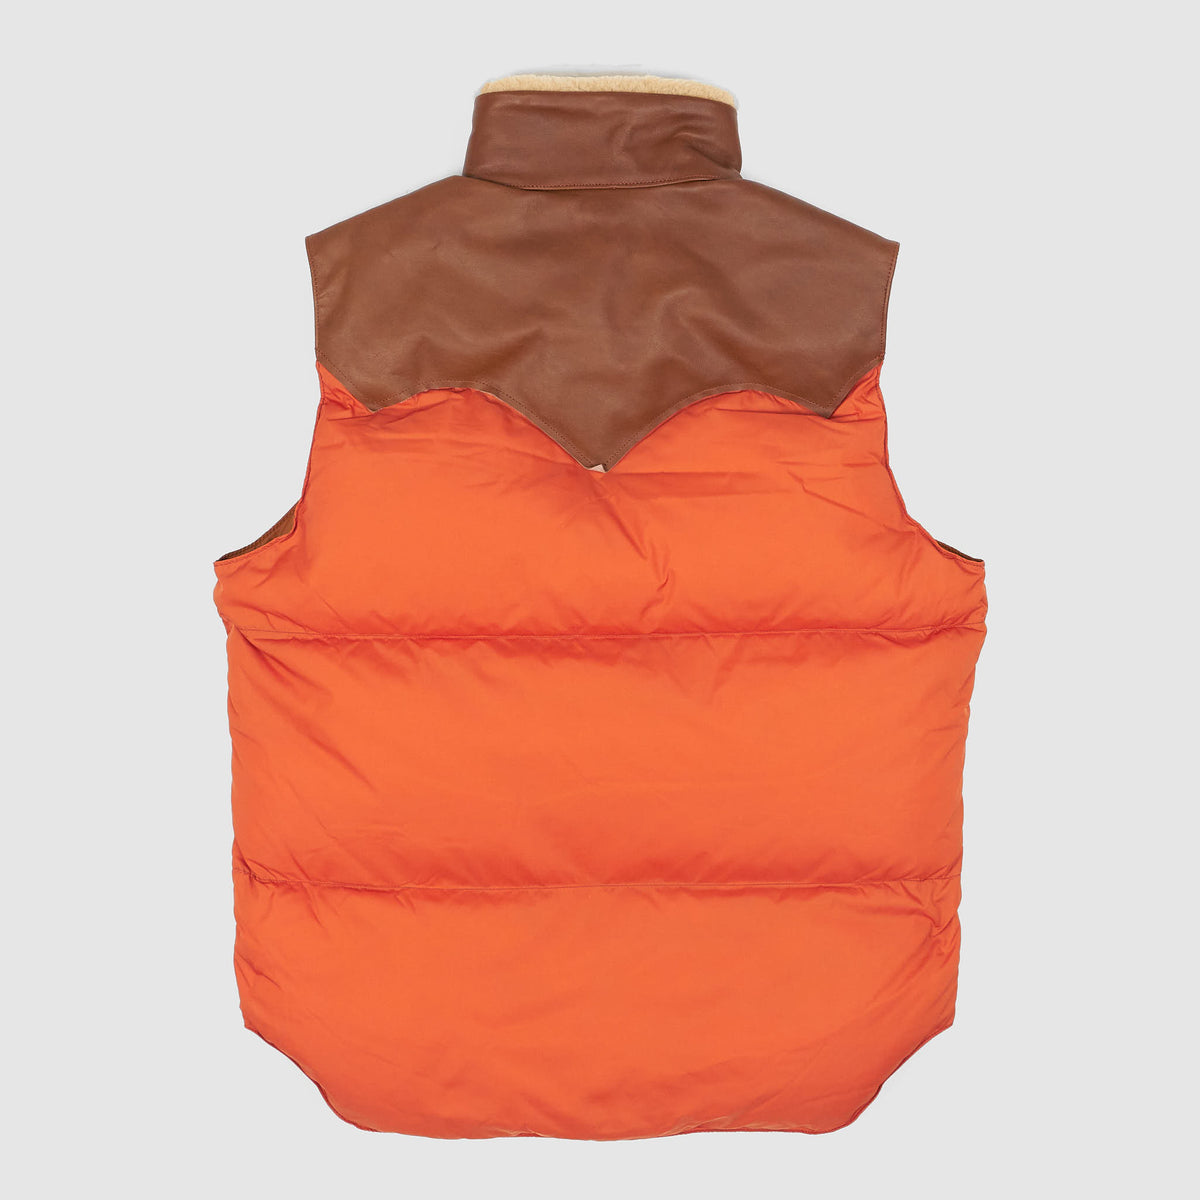 Rocky Mountain Featherbed Christy Down Vest